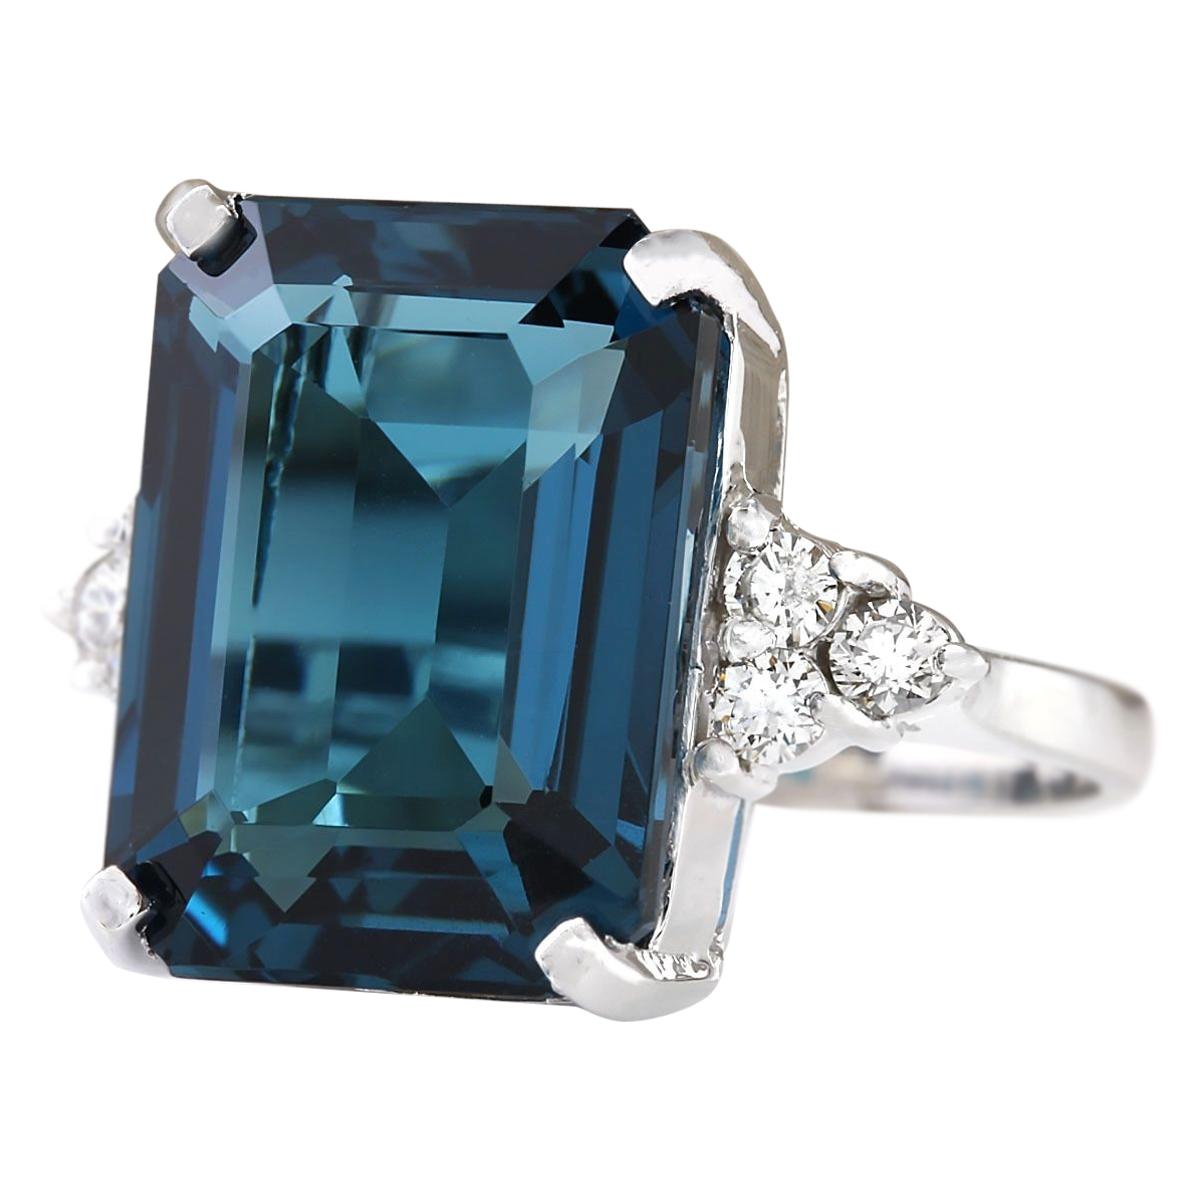 Stamped: 14K White Gold
Total Ring Weight: 8.0 Grams
Total Natural Topaz Weight is 12.74 Carat (Measures: 16.00x12.00 mm)
Color: London Blue
Total Natural Diamond Weight is 0.30 Carat
Color: F-G, Clarity: VS2-SI1
Face Measures: 16.00x20.40 mm
Sku: